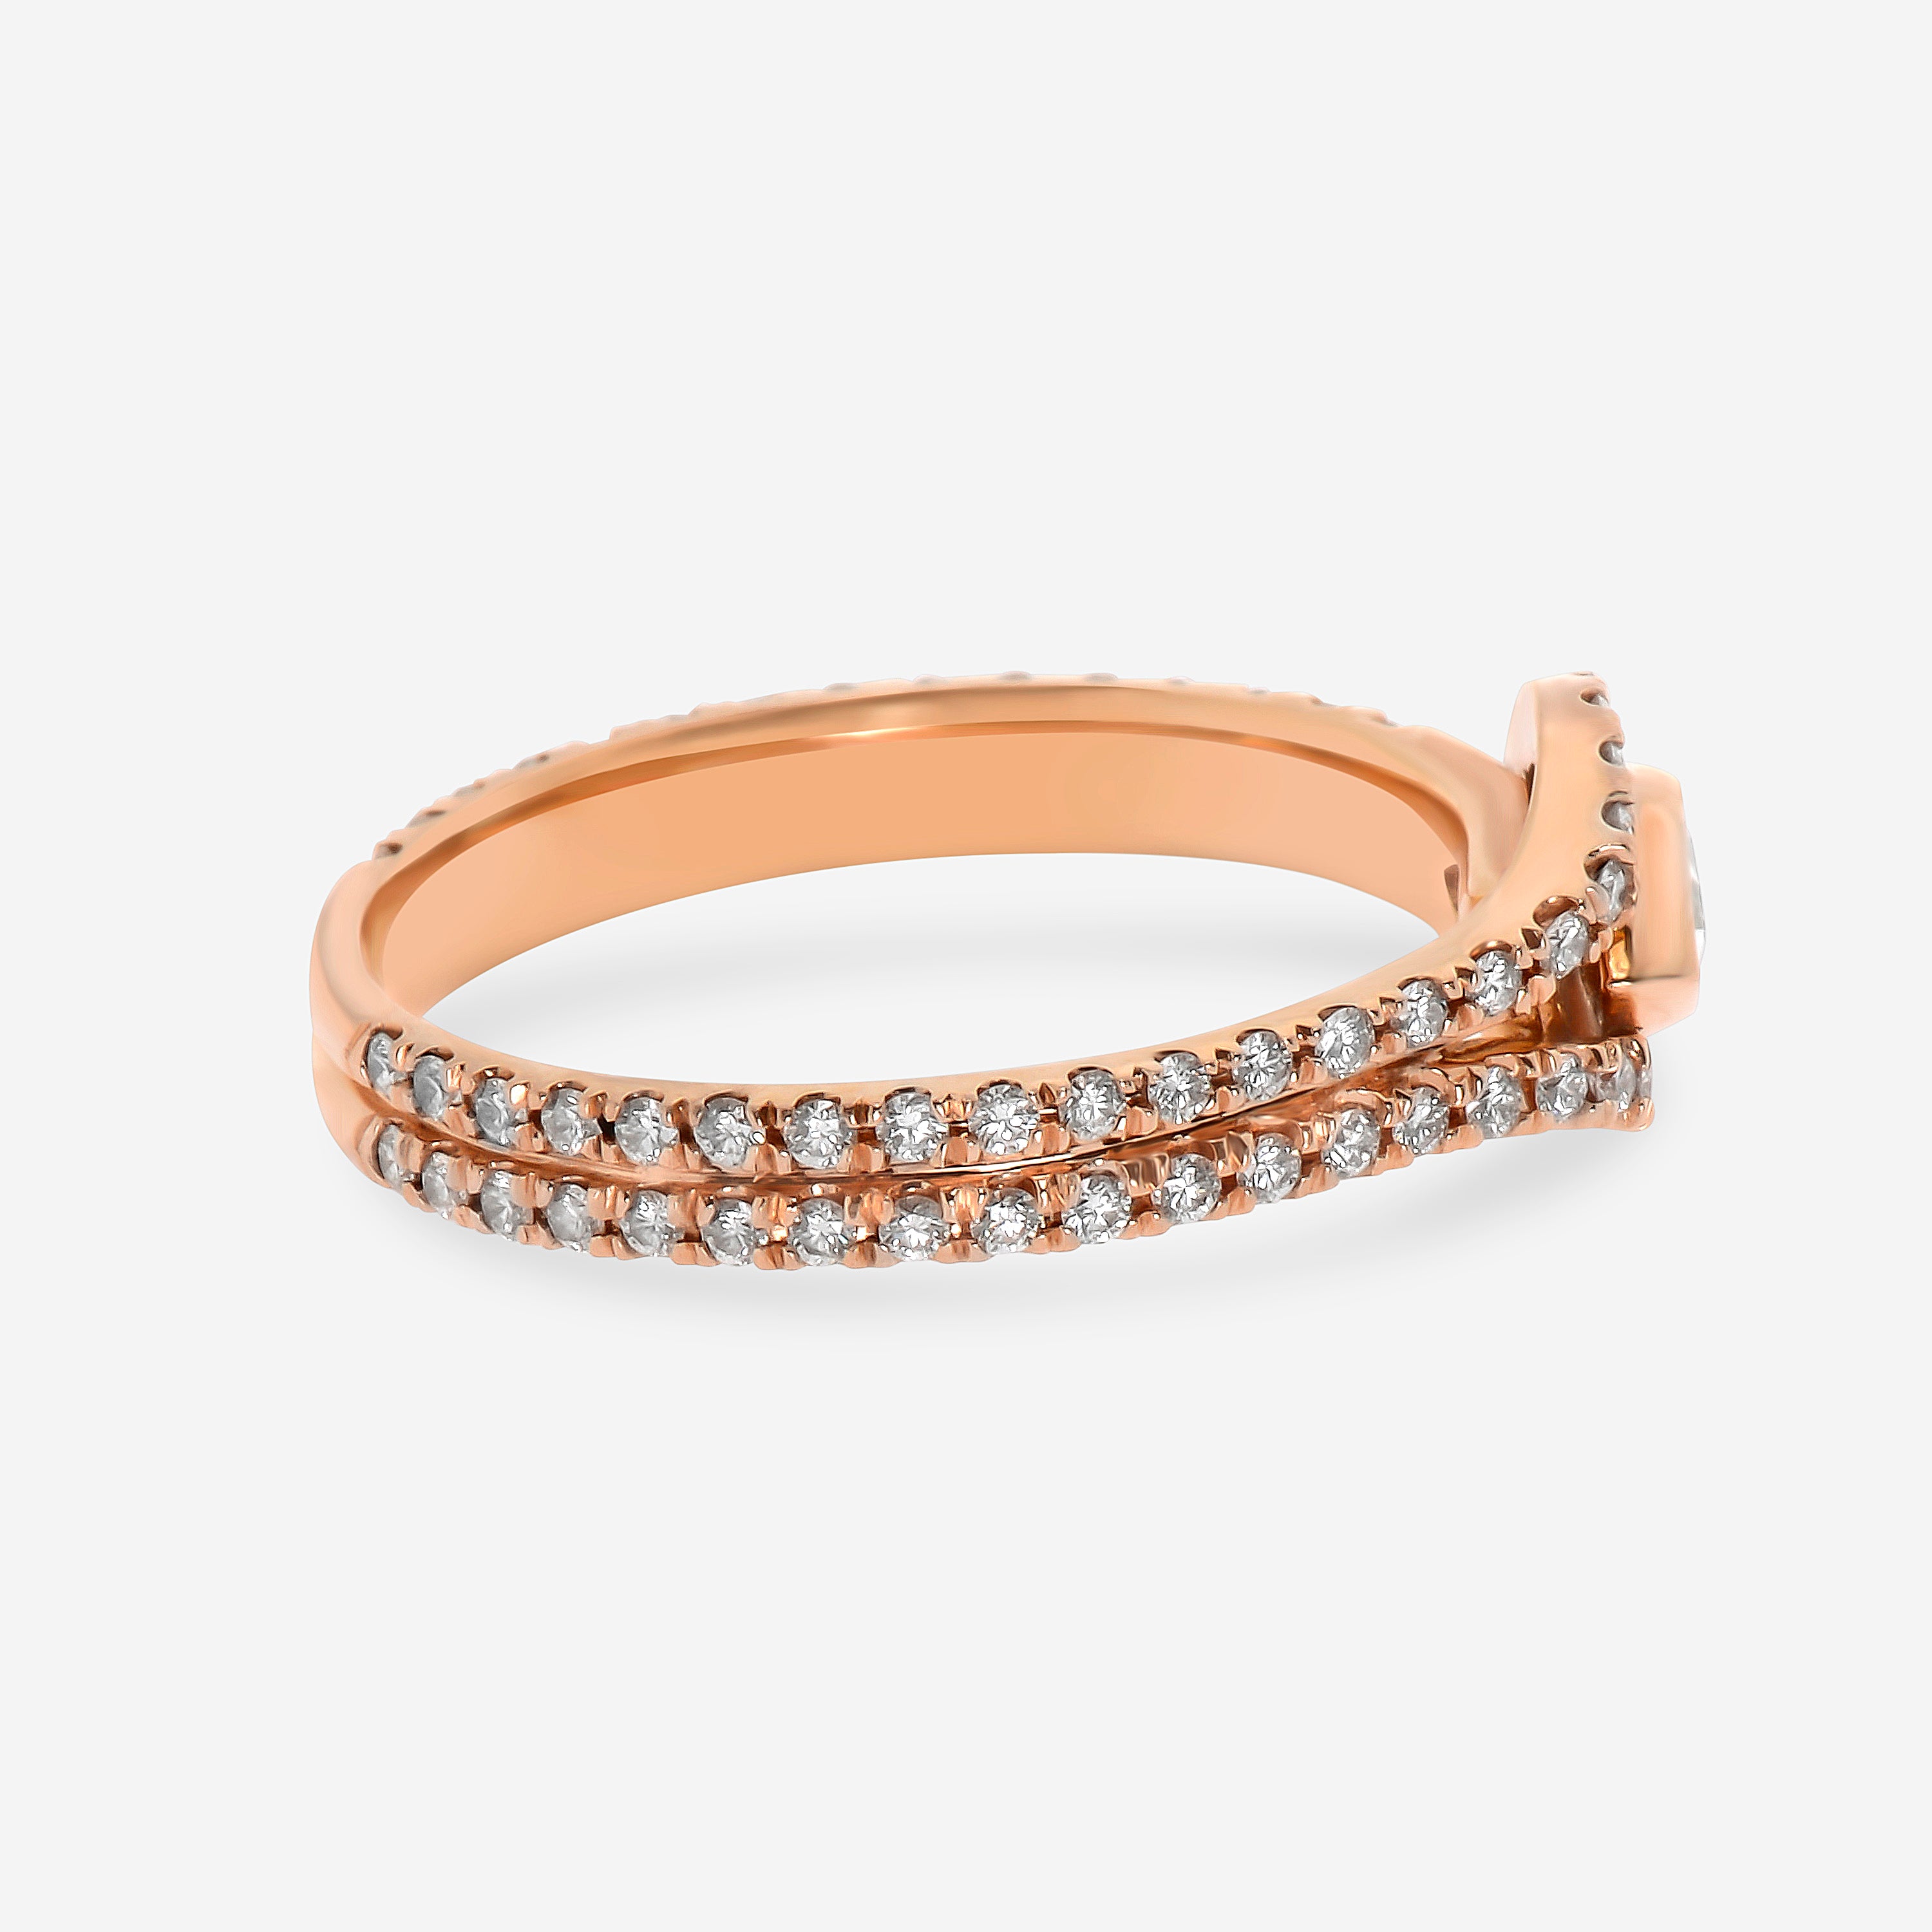 Kwiat 18K Rose Gold, Diamond Button Ring - THE SOLIST